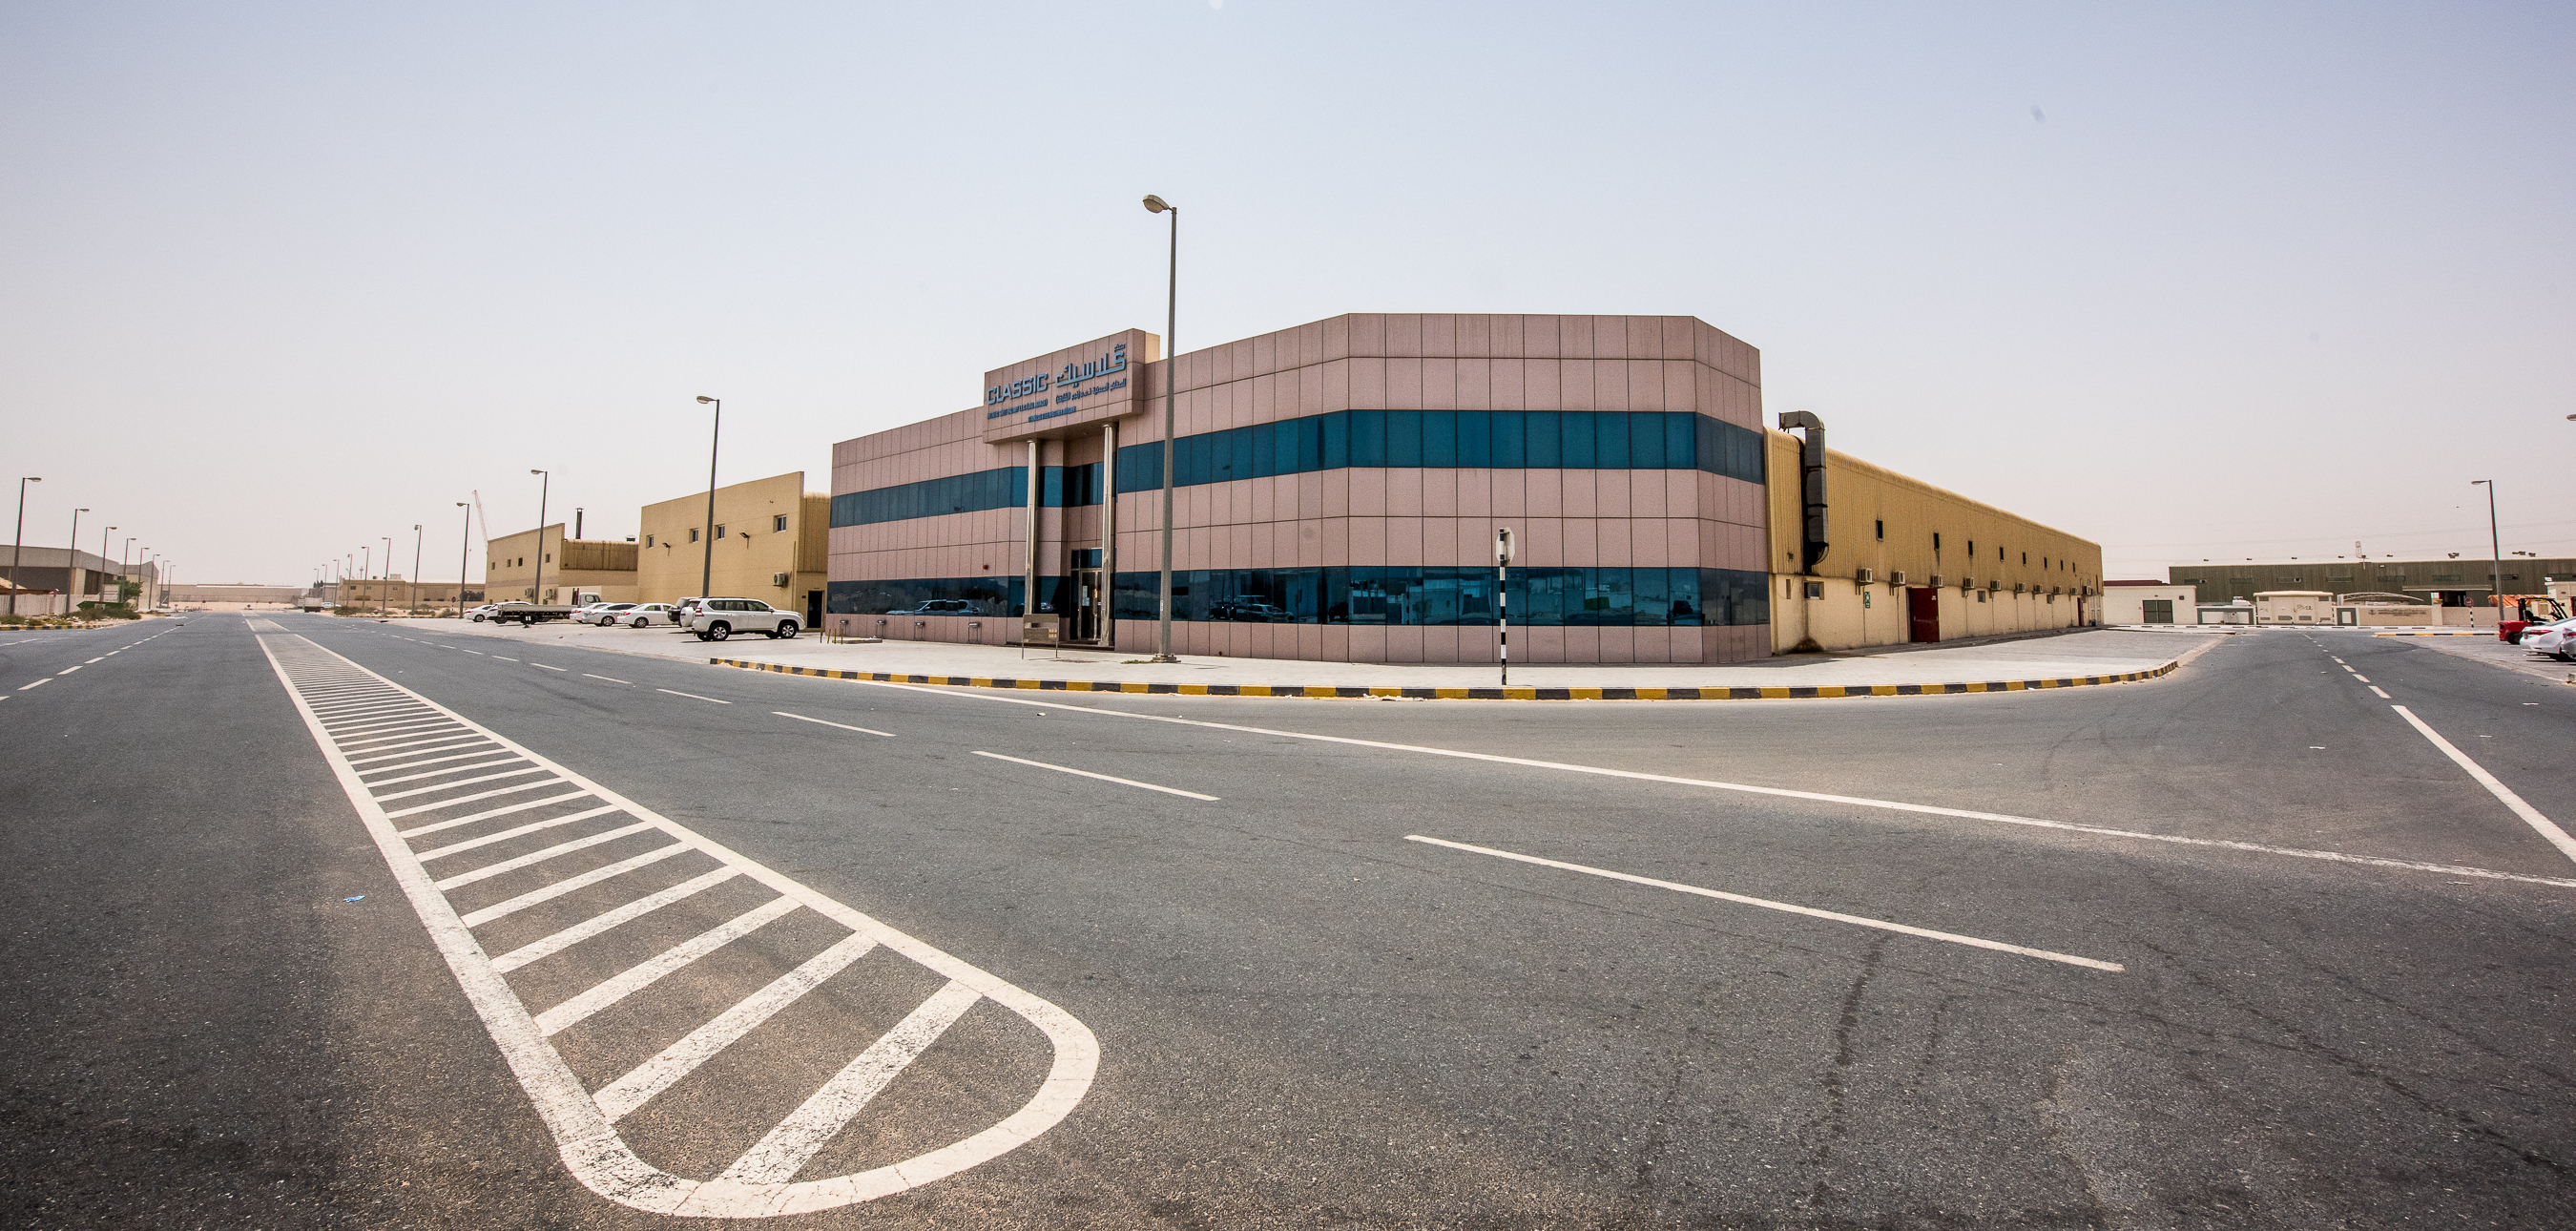 Emirates Industrial for Cities Industrial lands in Sharjah with better connectivity